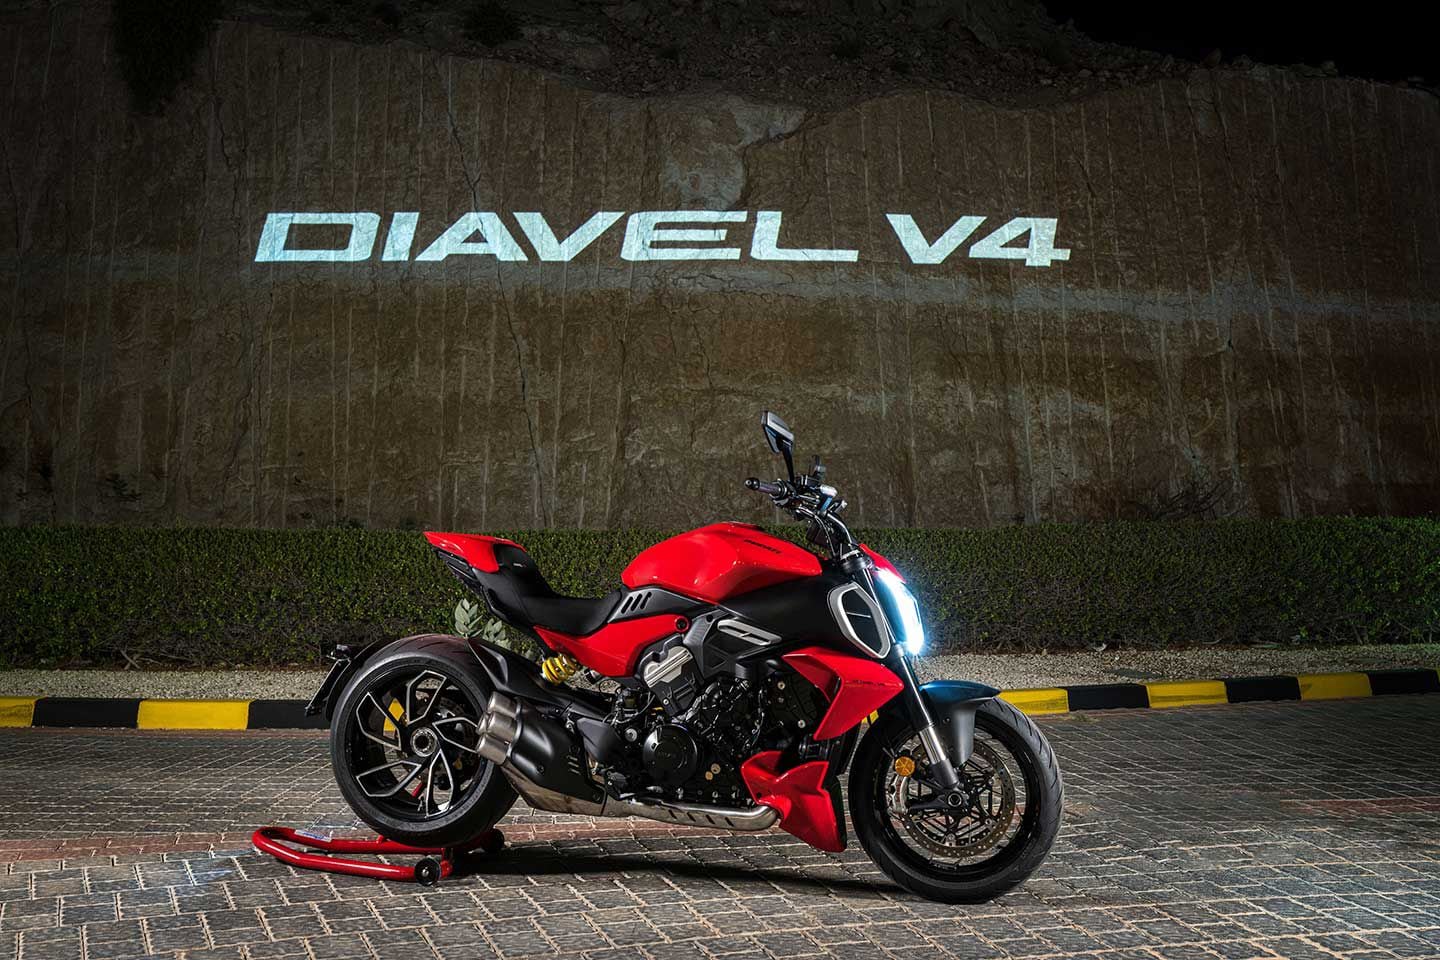 Ducati’s Diavel V4 is 29 pounds lighter than the Diavel 1260 it replaces.